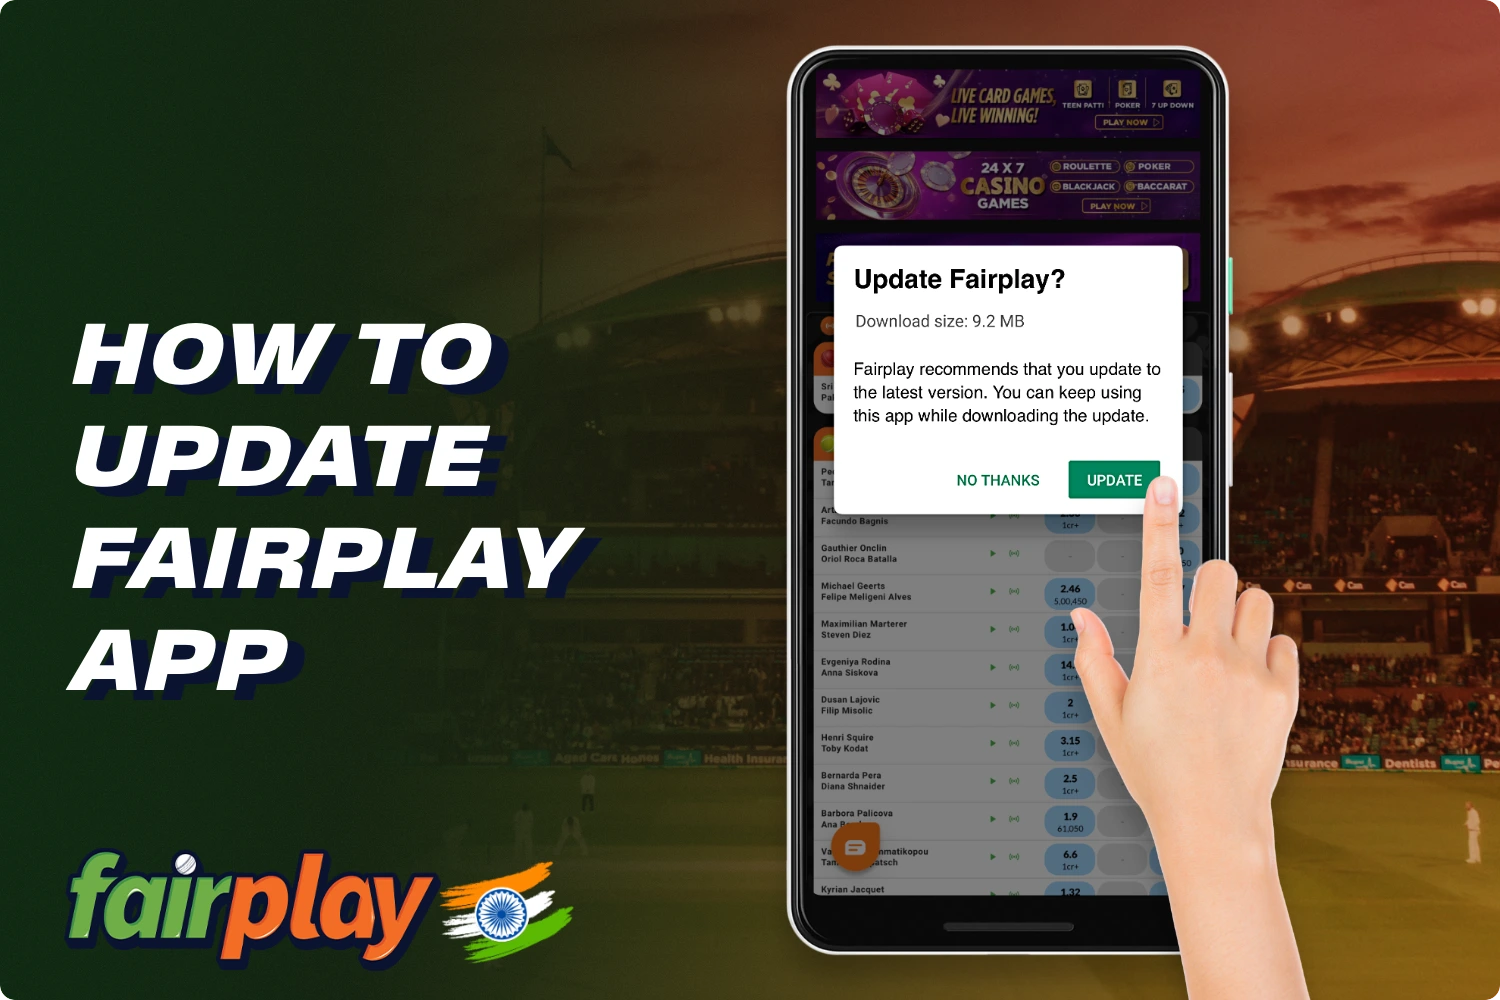 As updates are released, users of the Fairplay app can update to the latest version of the app